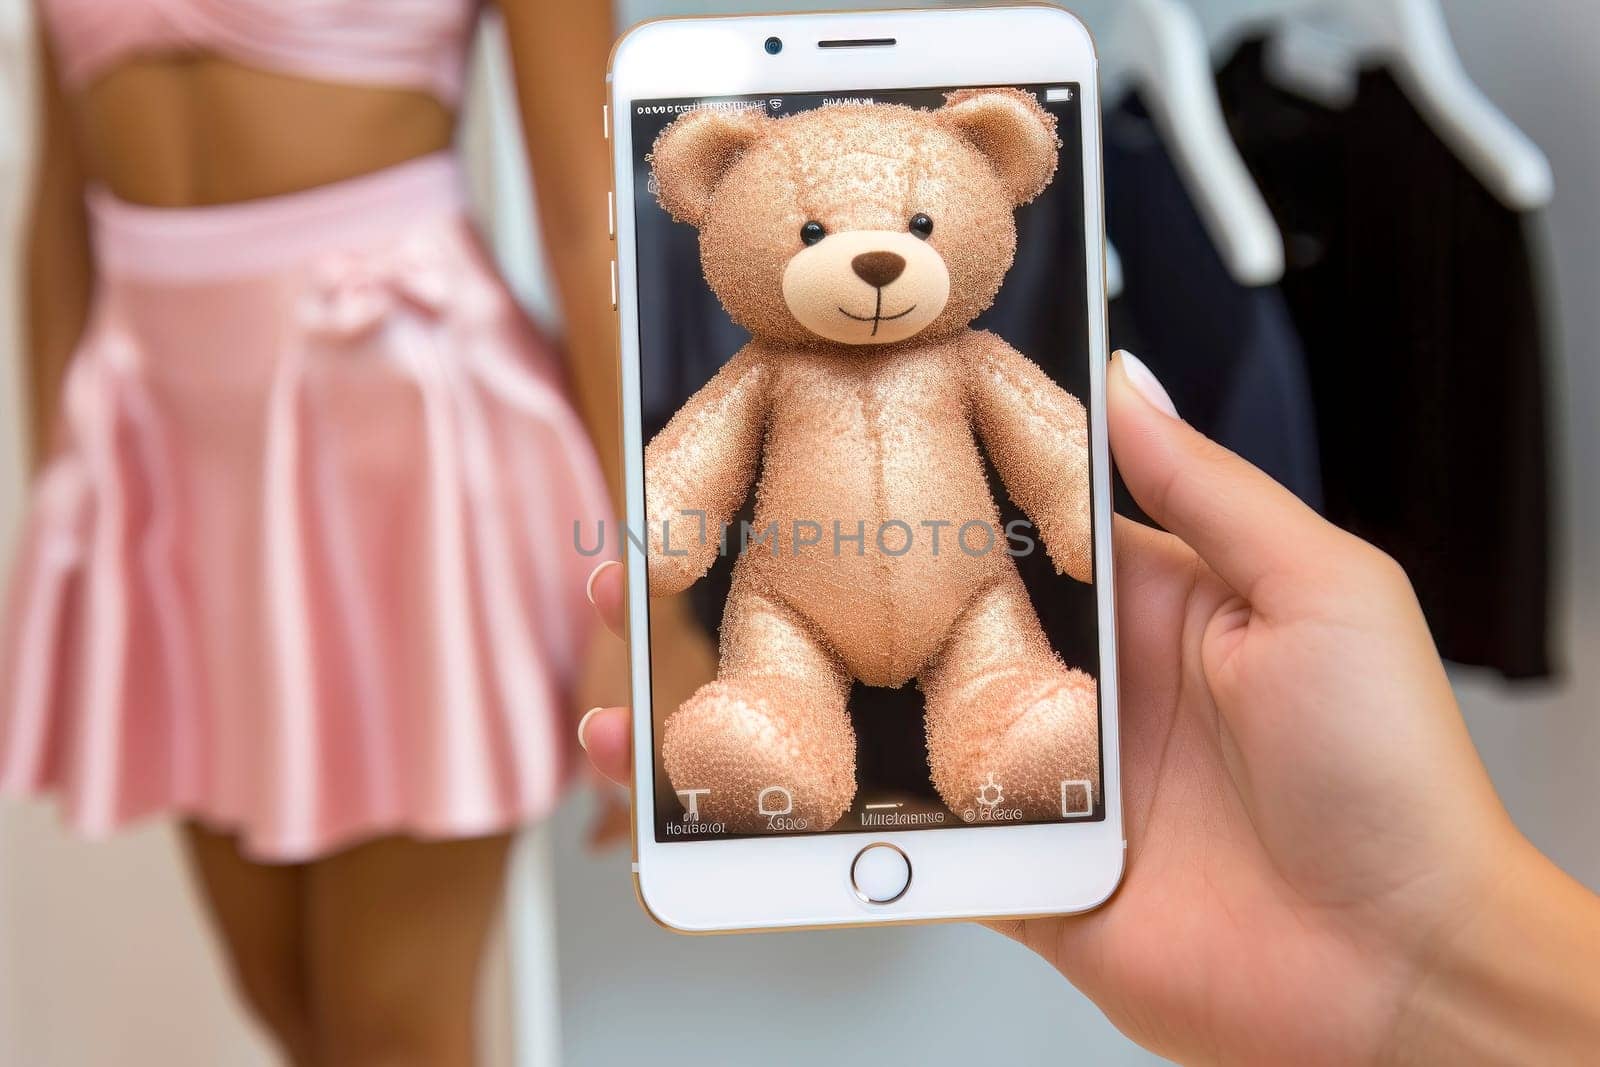 Memories of Childhood: Smartphone with Teddy Bear Image by pippocarlot